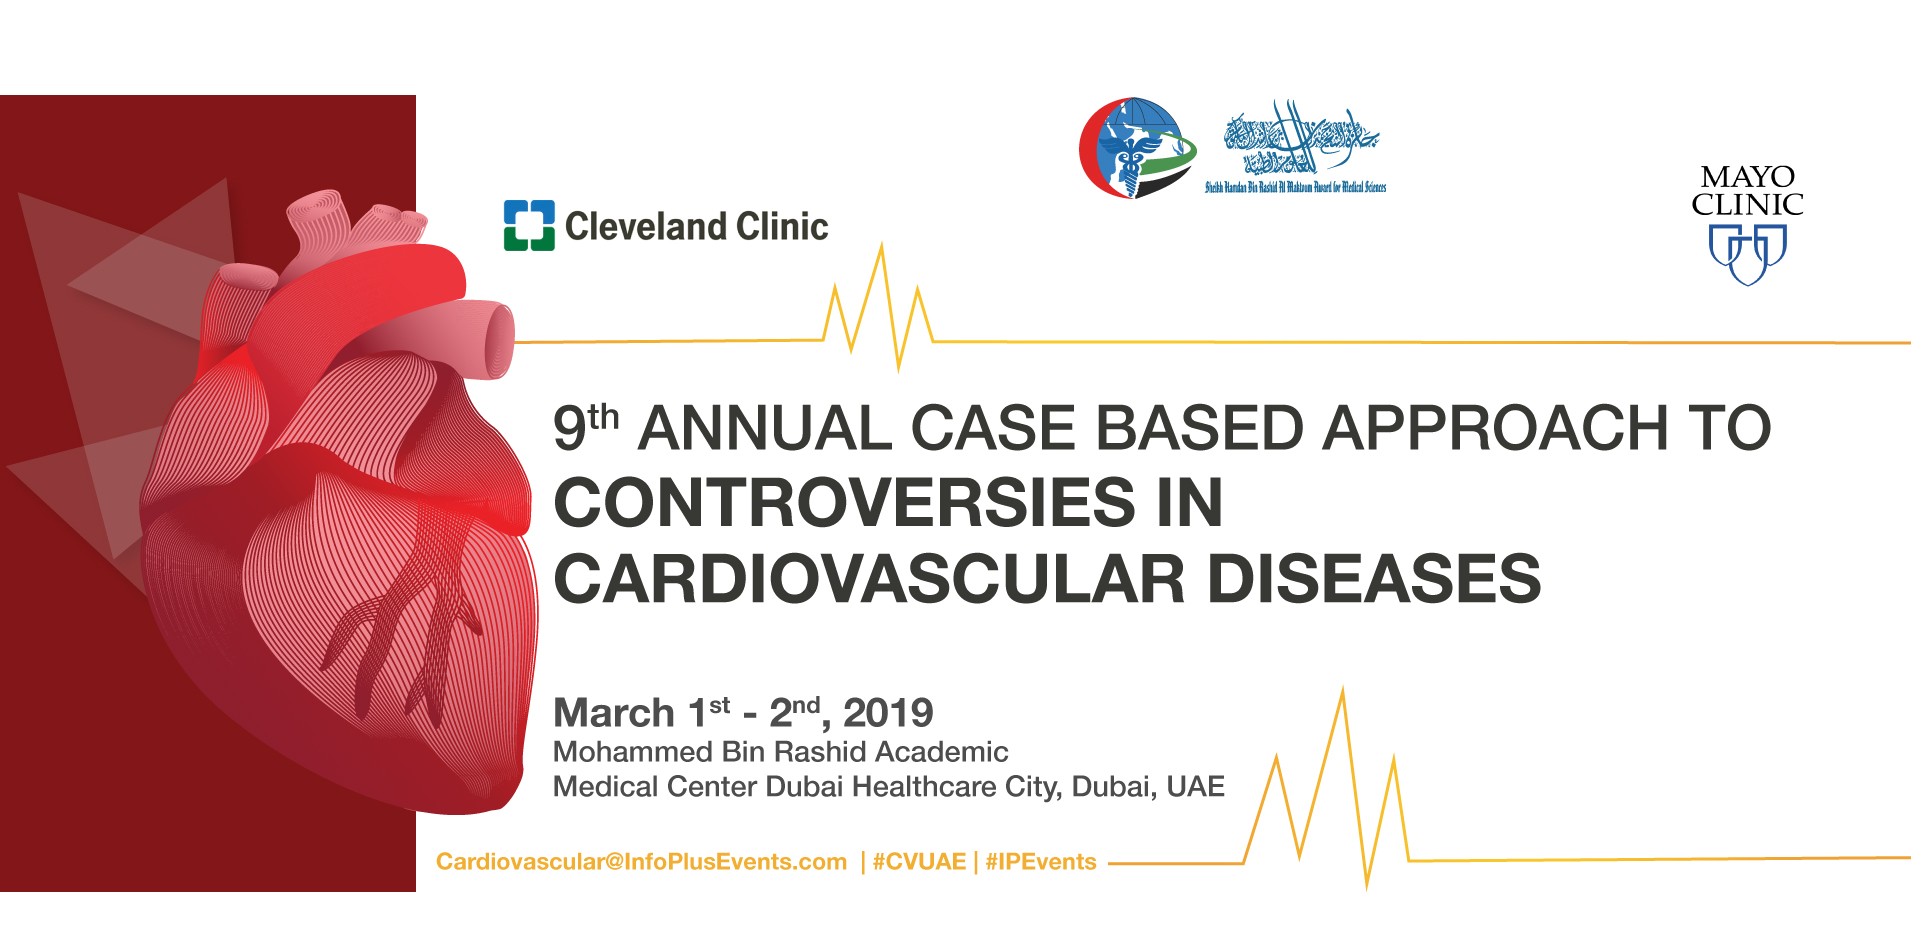 9th Annual Case Based Approach to Controversies in Cardiovascular Diseases